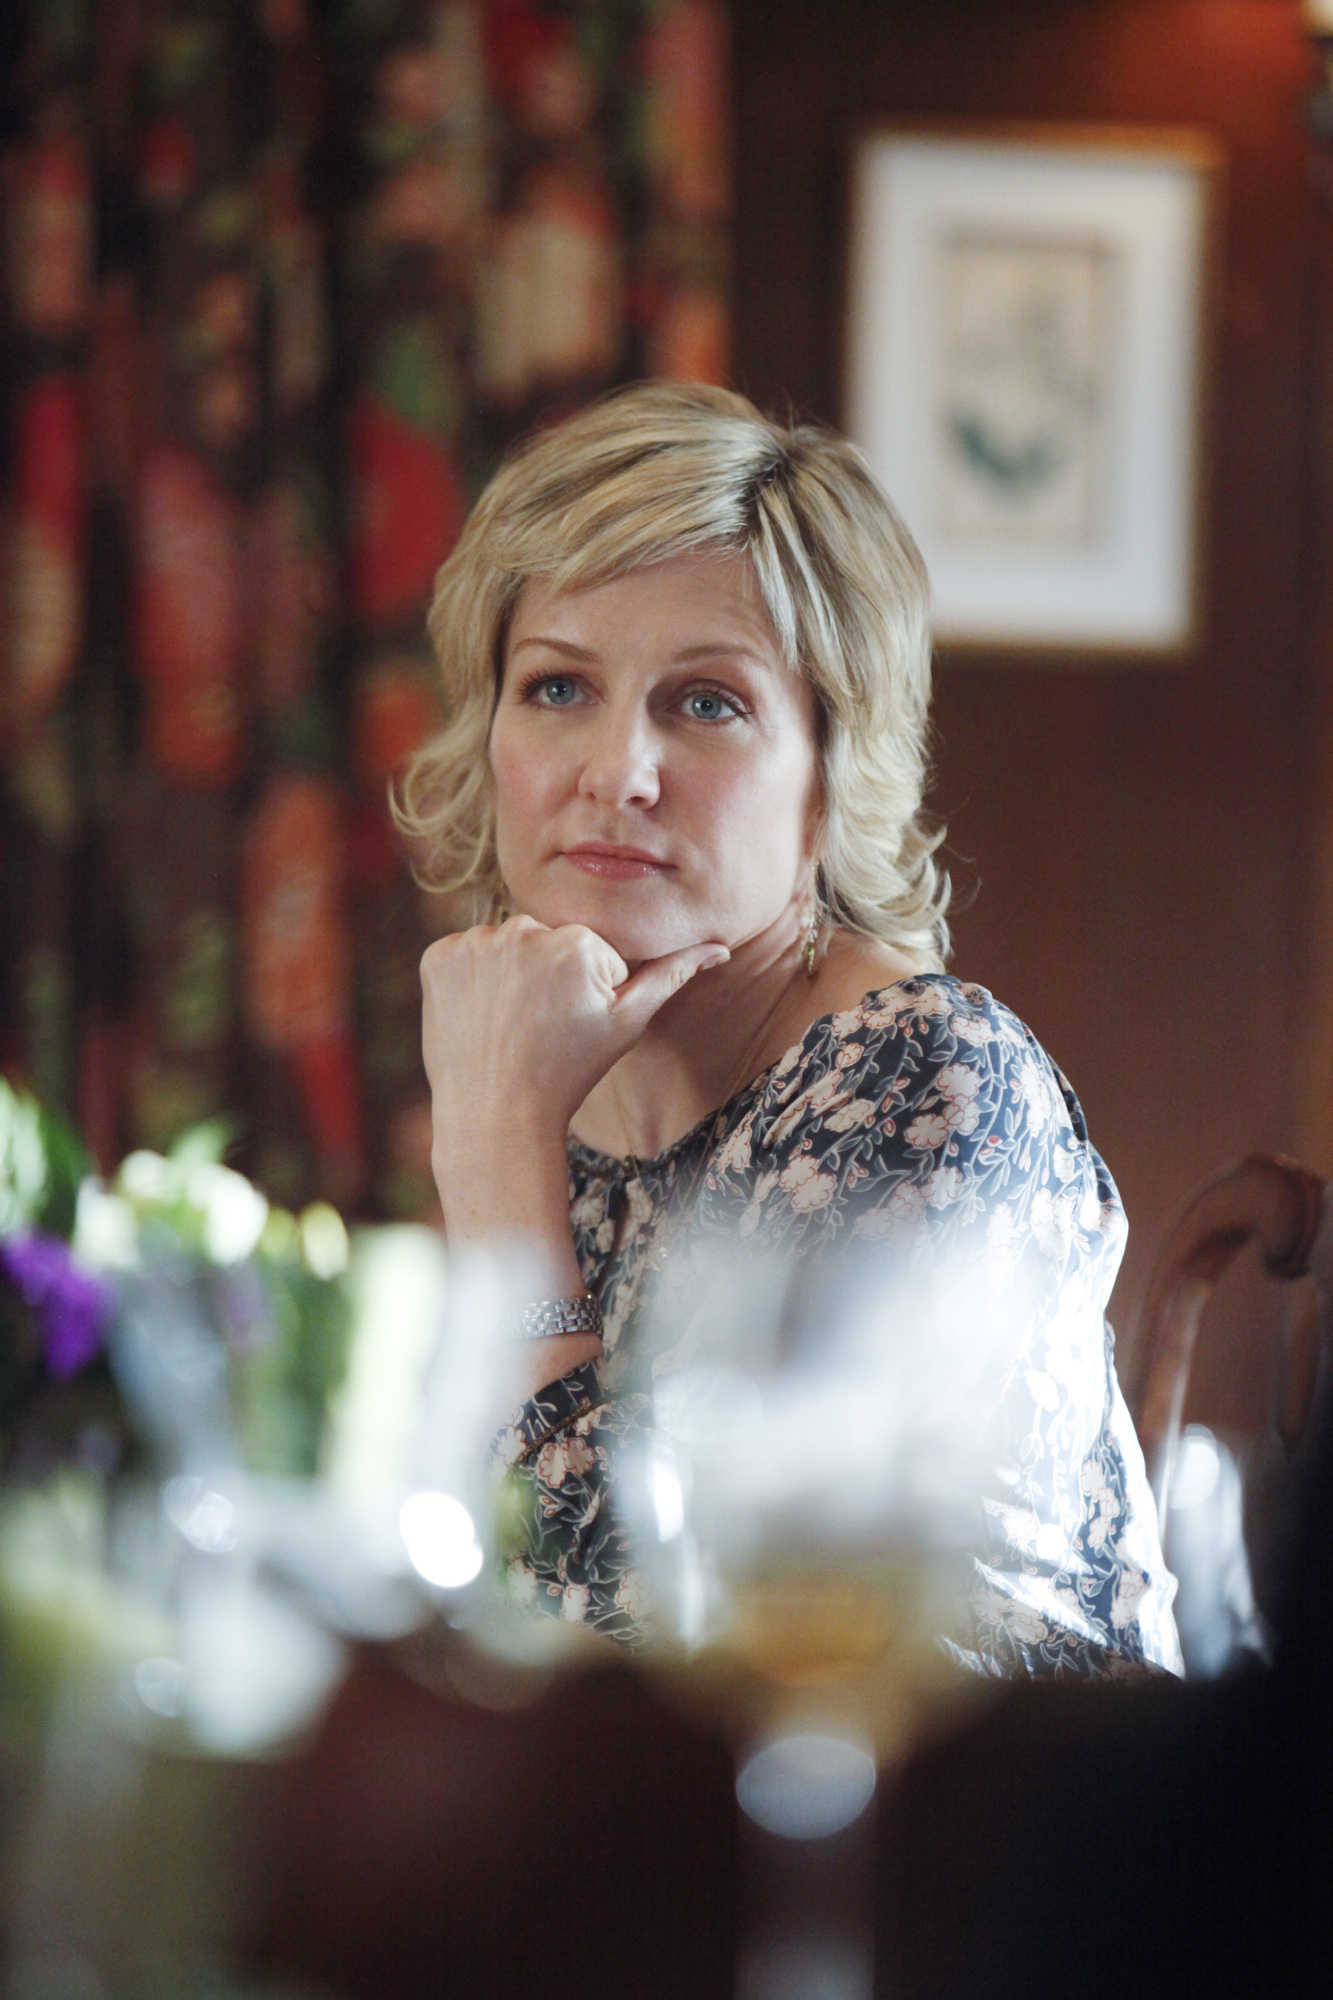 Highlights from the Fourteenth Episode of Season 2 of Blue Bloods